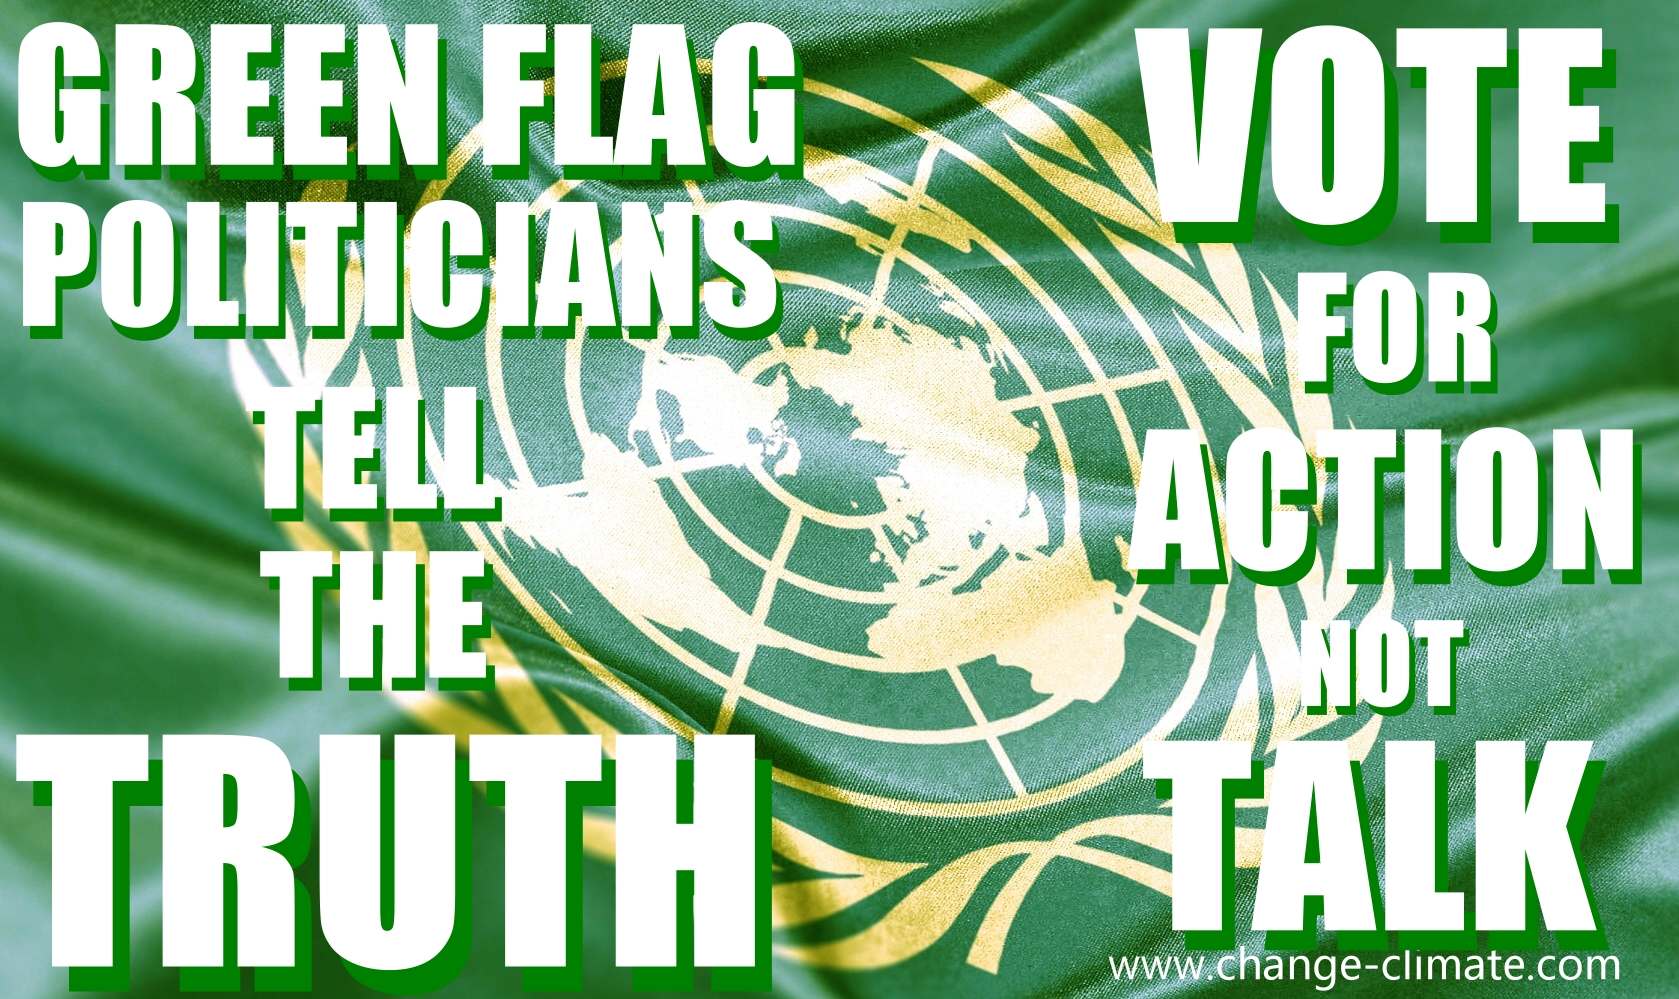 Green flag politiicans get the job done, vote for a better world